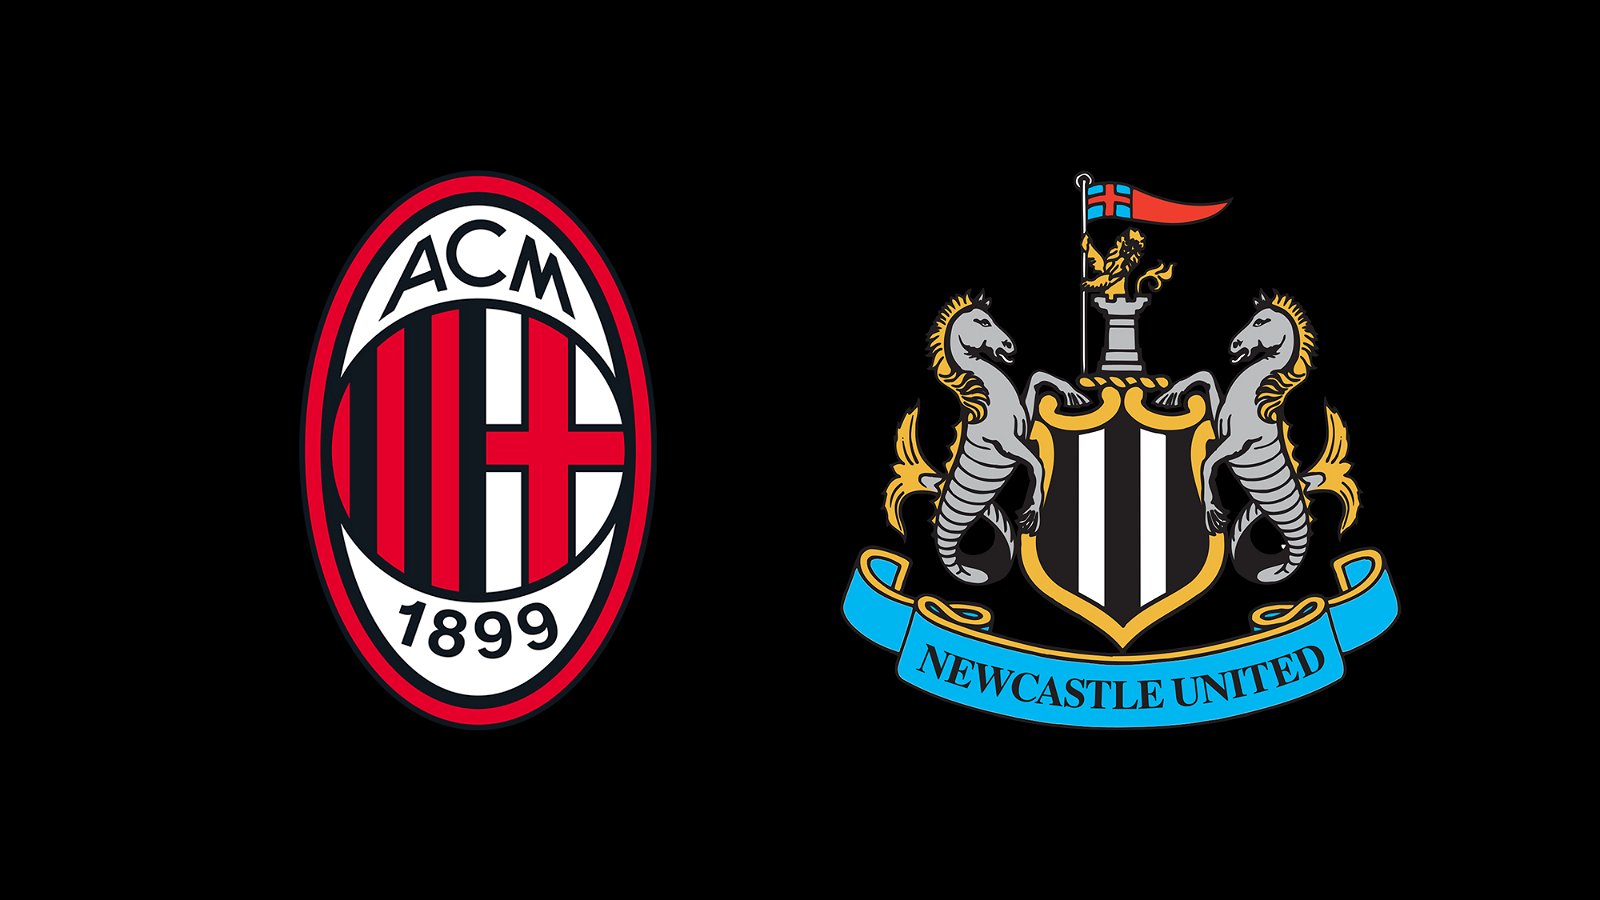 UEFA release details of AC Milan v Newcastle United match officials - NUFC  The Mag